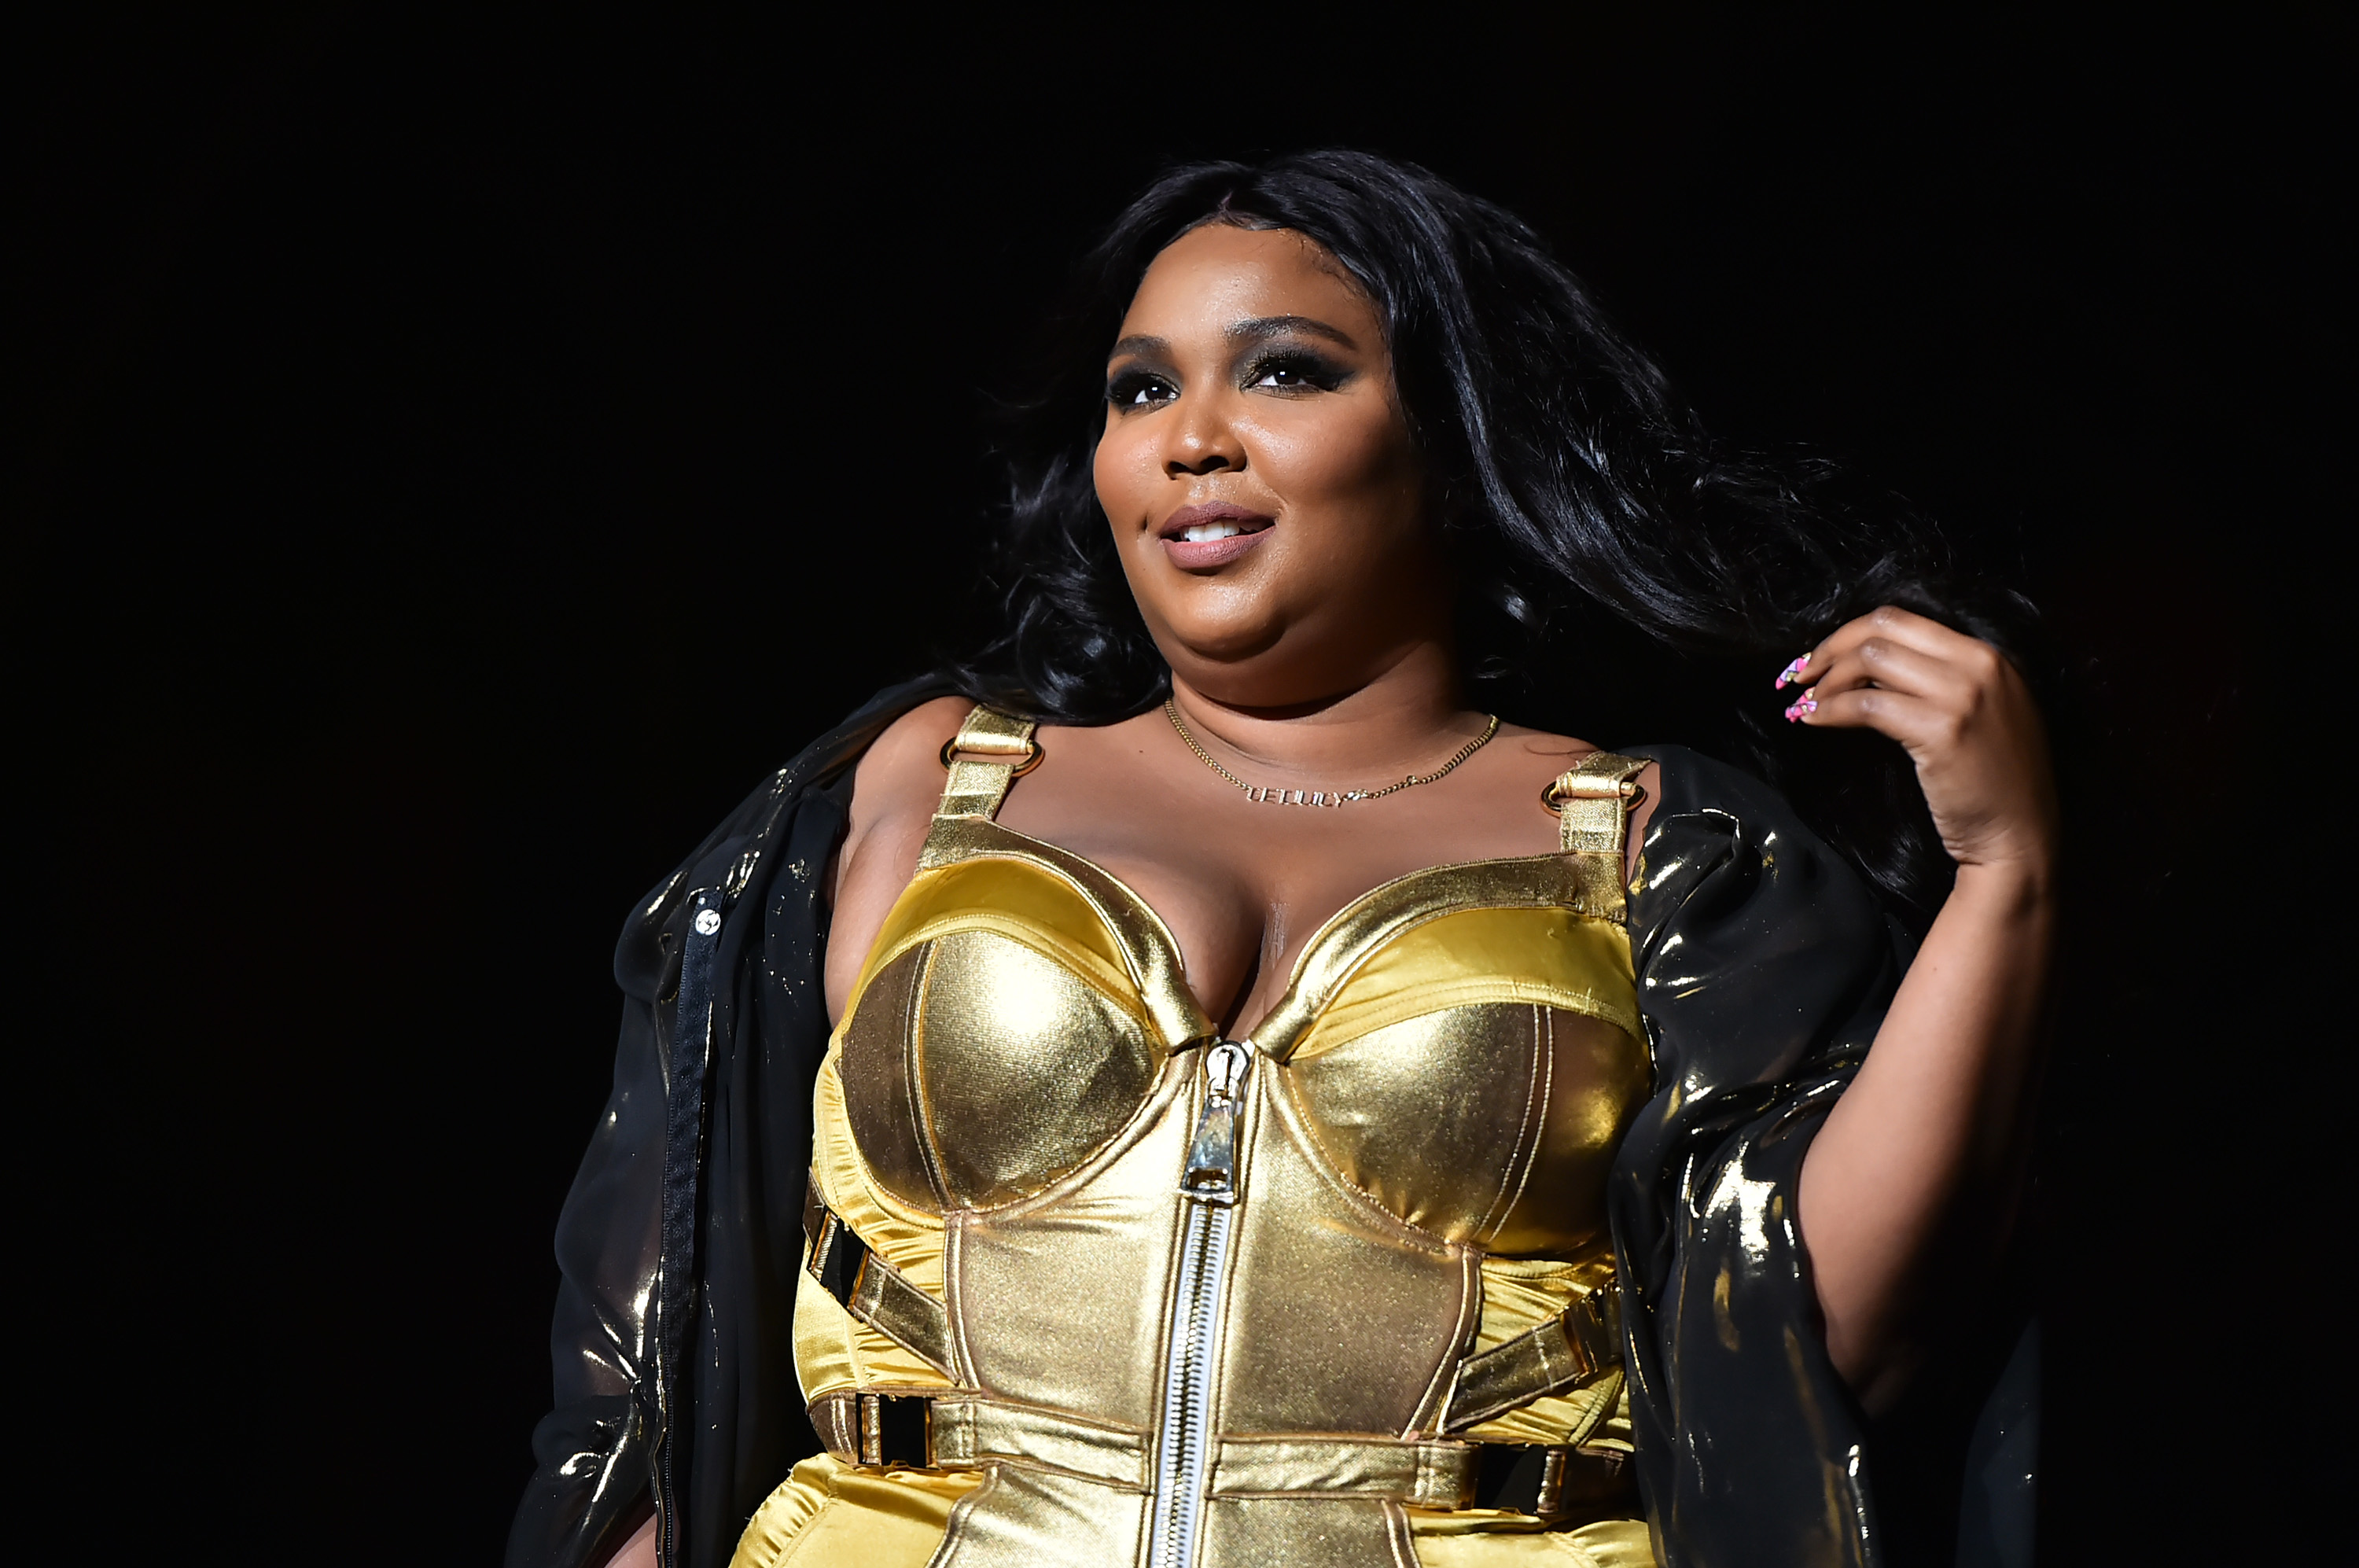 'Truth Hurts' singer, Lizzo, performs at Radio City Music Hall dressed in gold